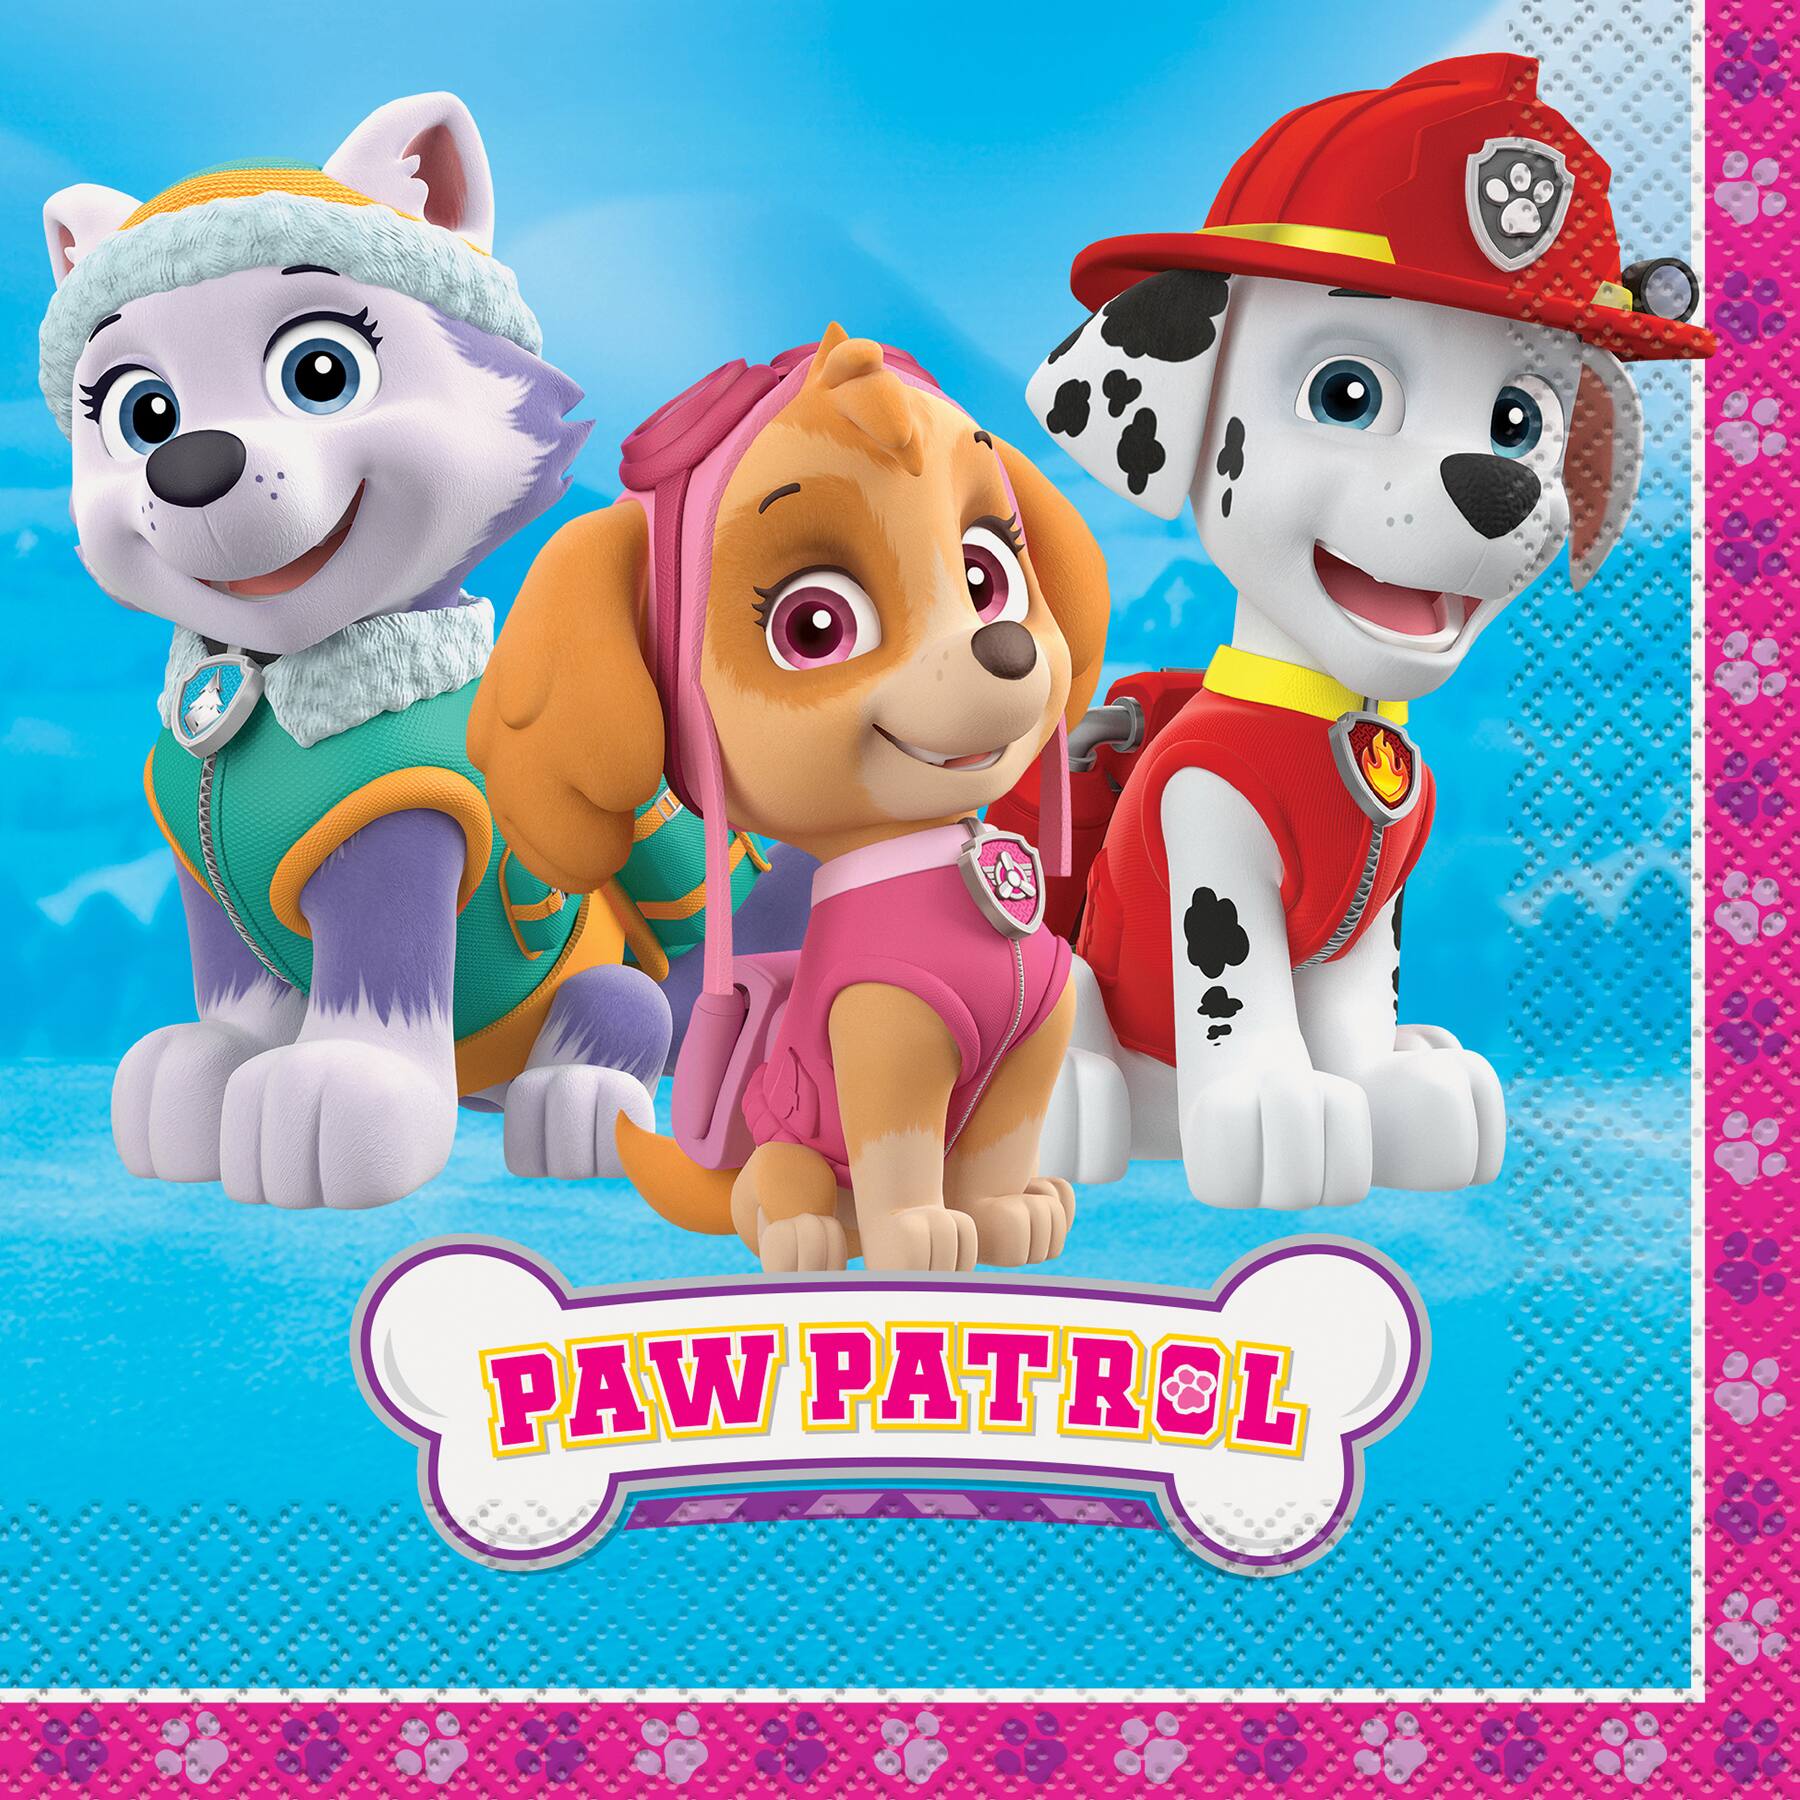 Paw Patrol Everest Iron On Transfer 5 "x 6.5" for LIGHT Colored Fabric 